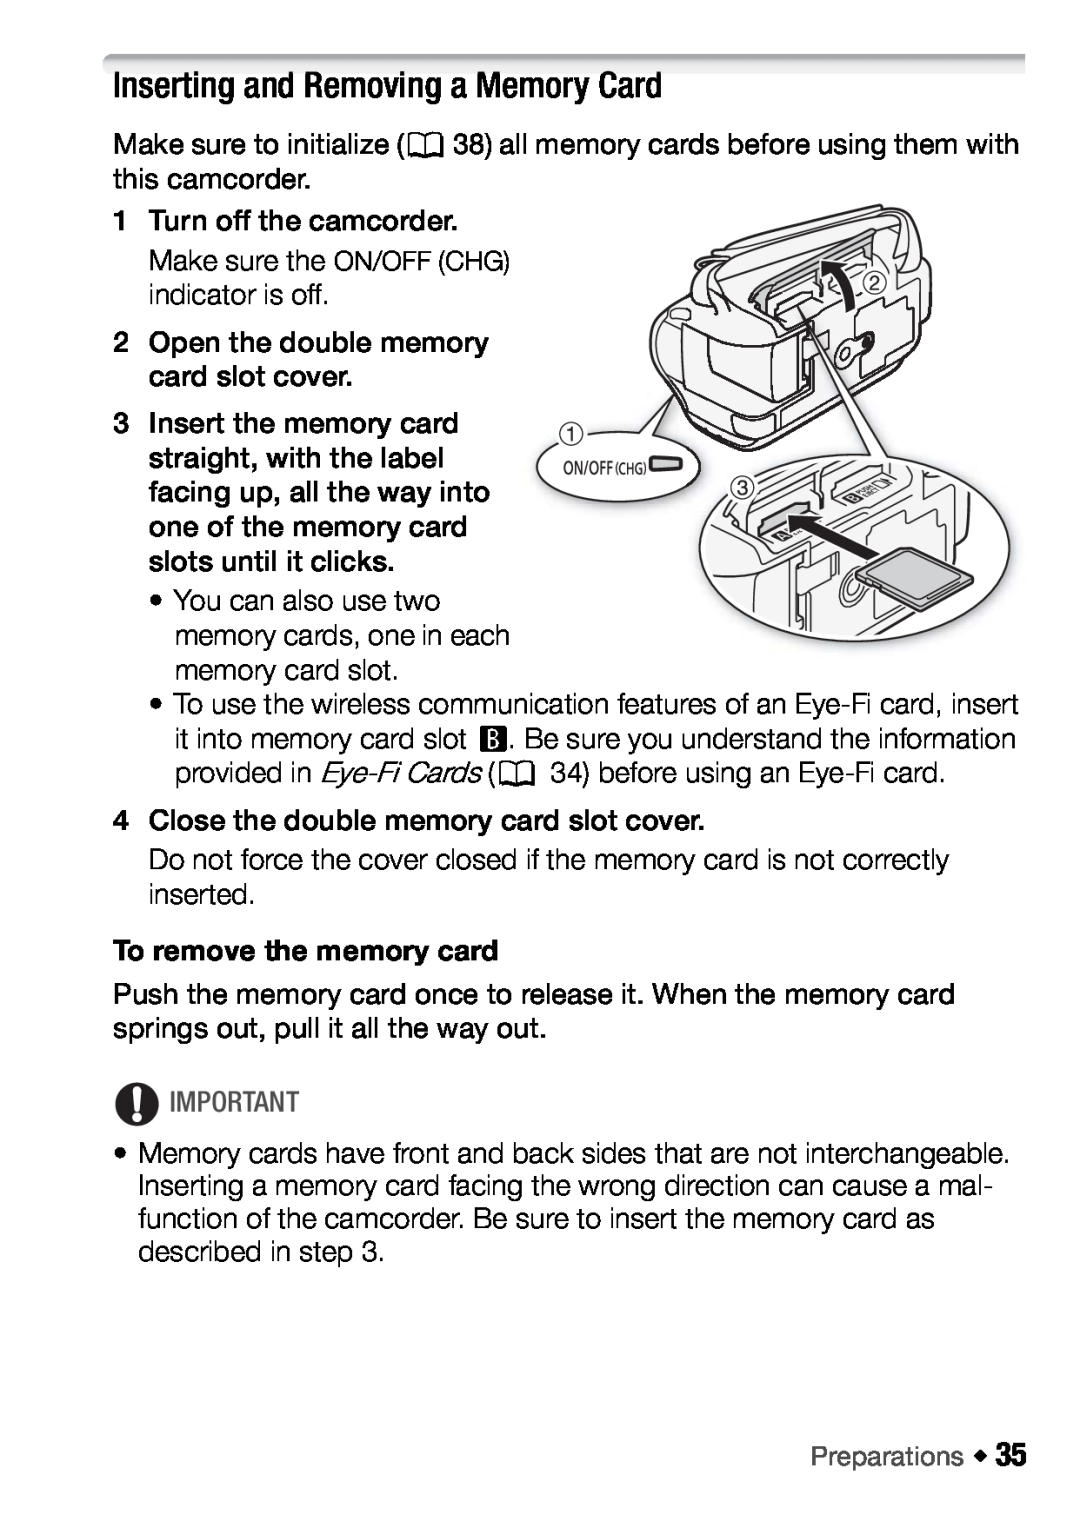 Canon HFM46, HFM406 instruction manual Inserting and Removing a Memory Card, To remove the memory card 